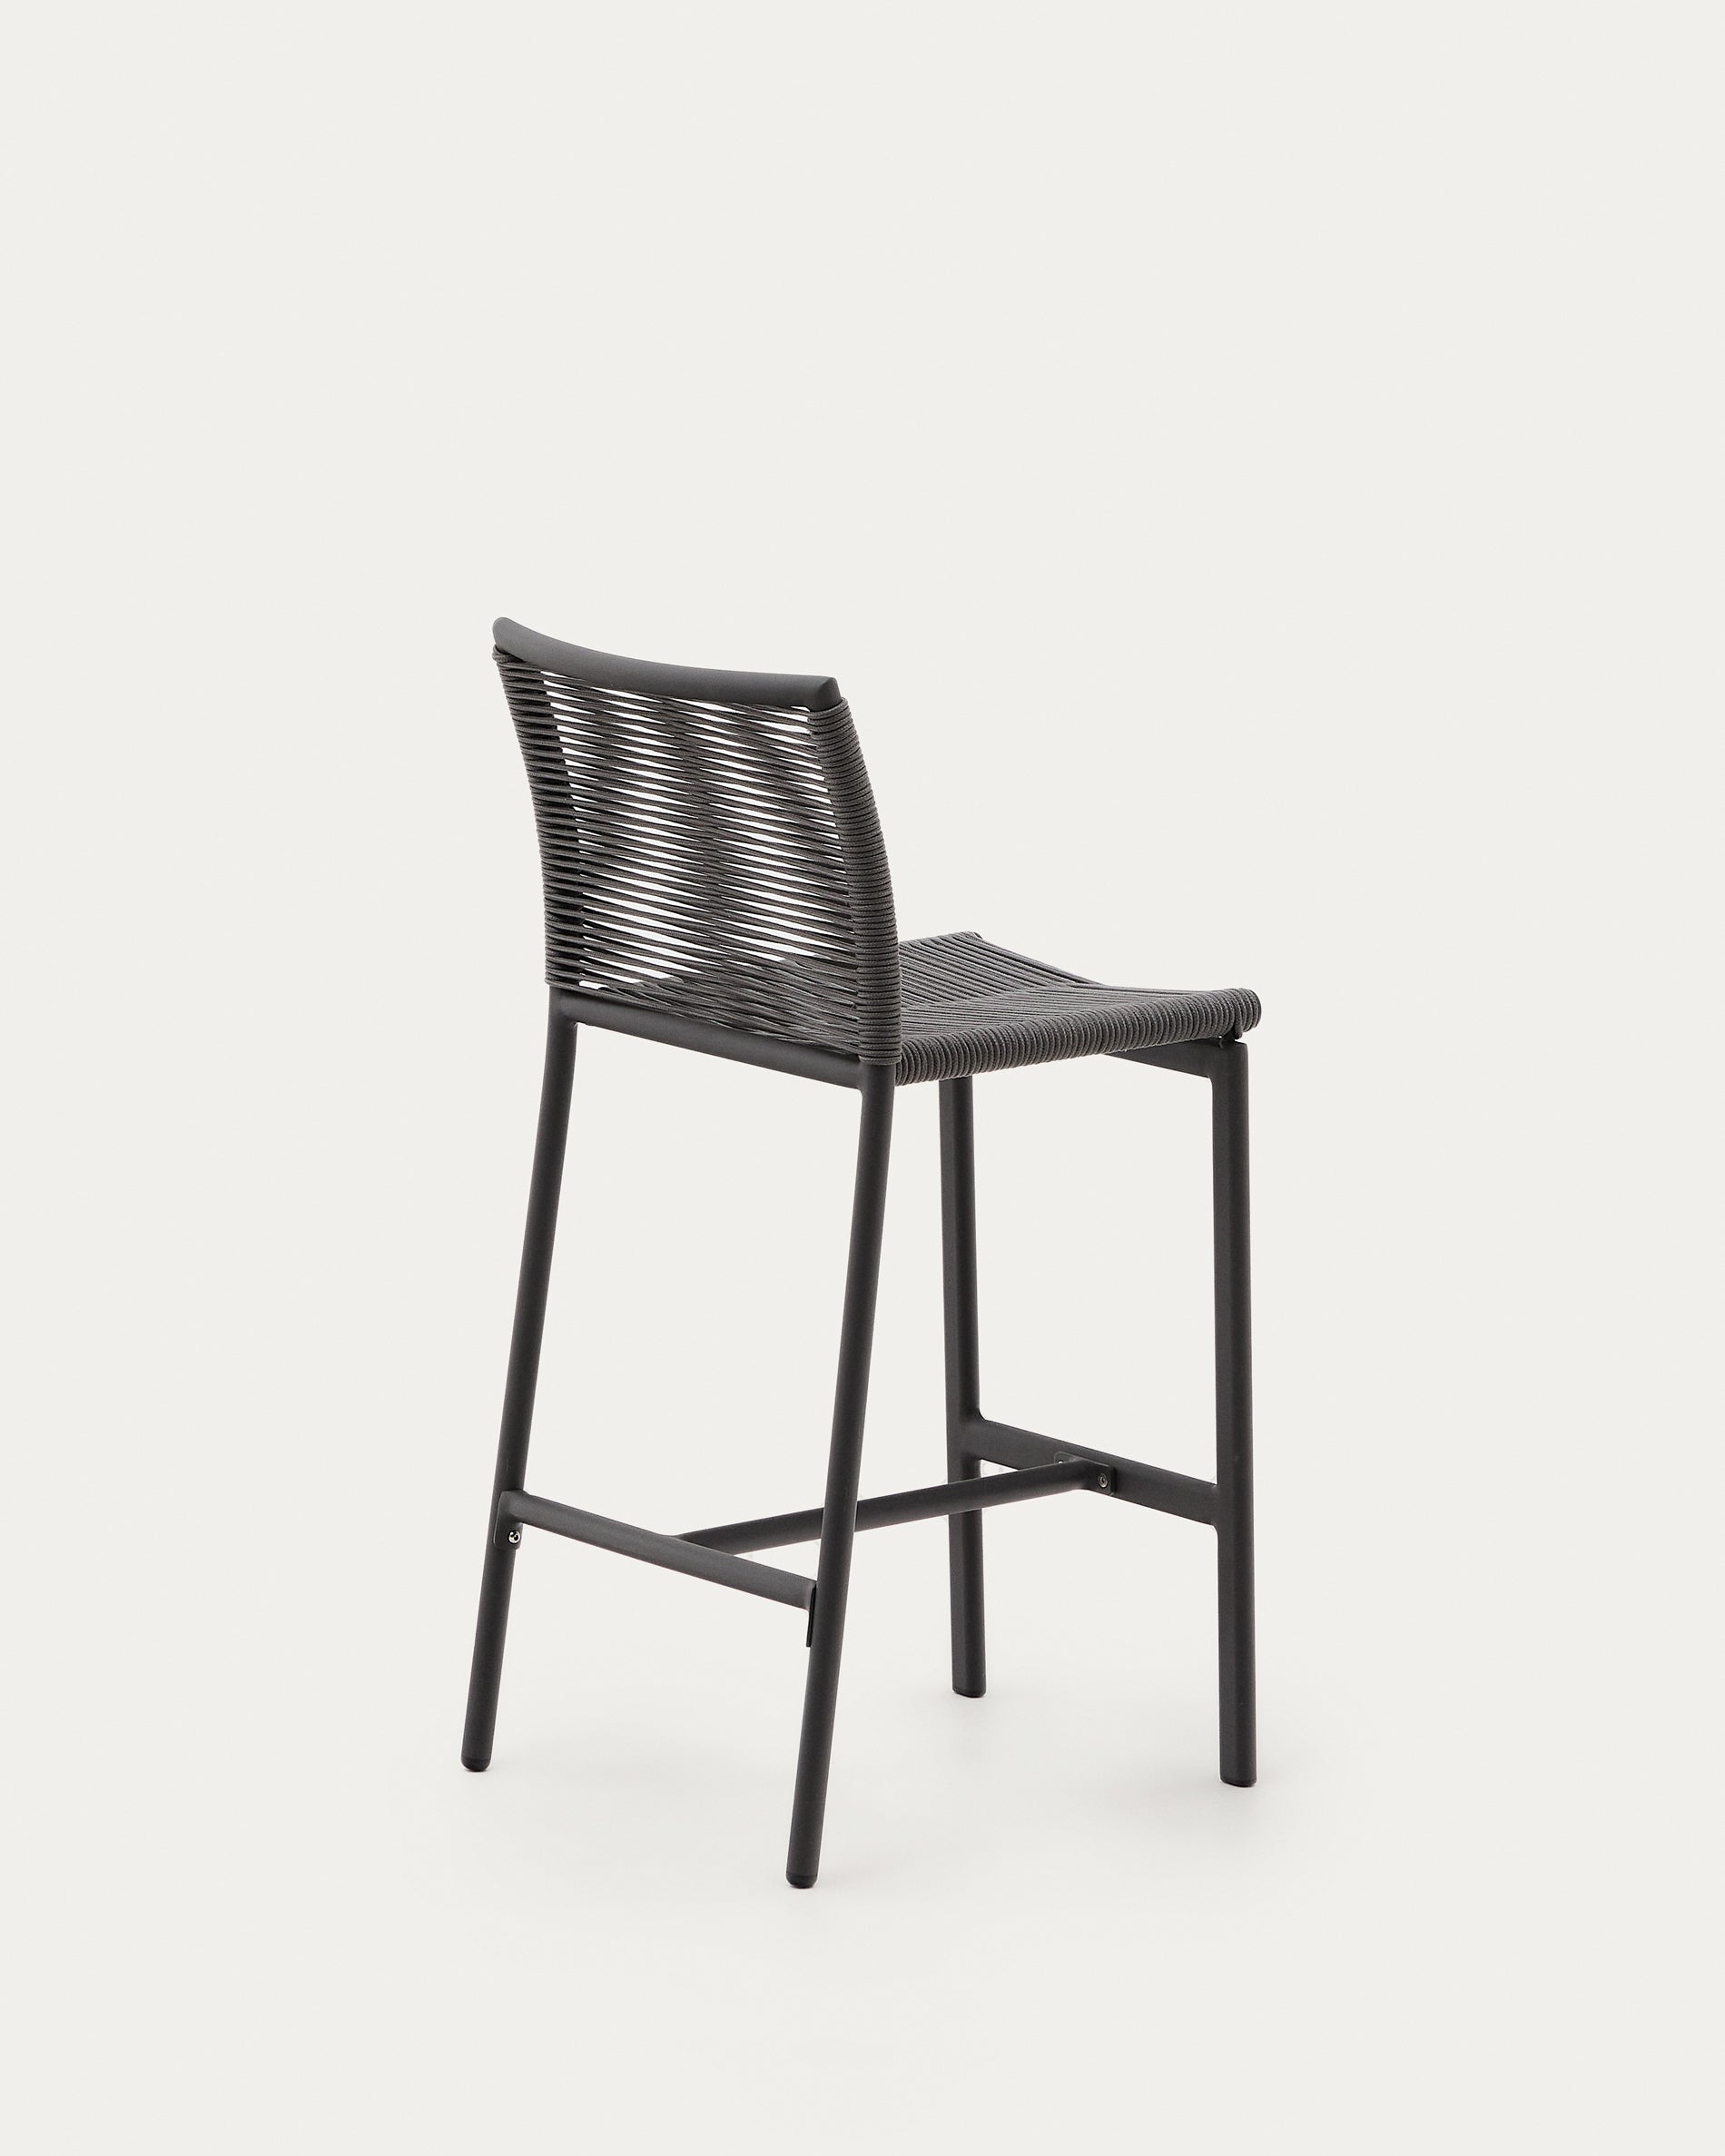 Culip outdoor chair made of rope and gray aluminum, 65 cm